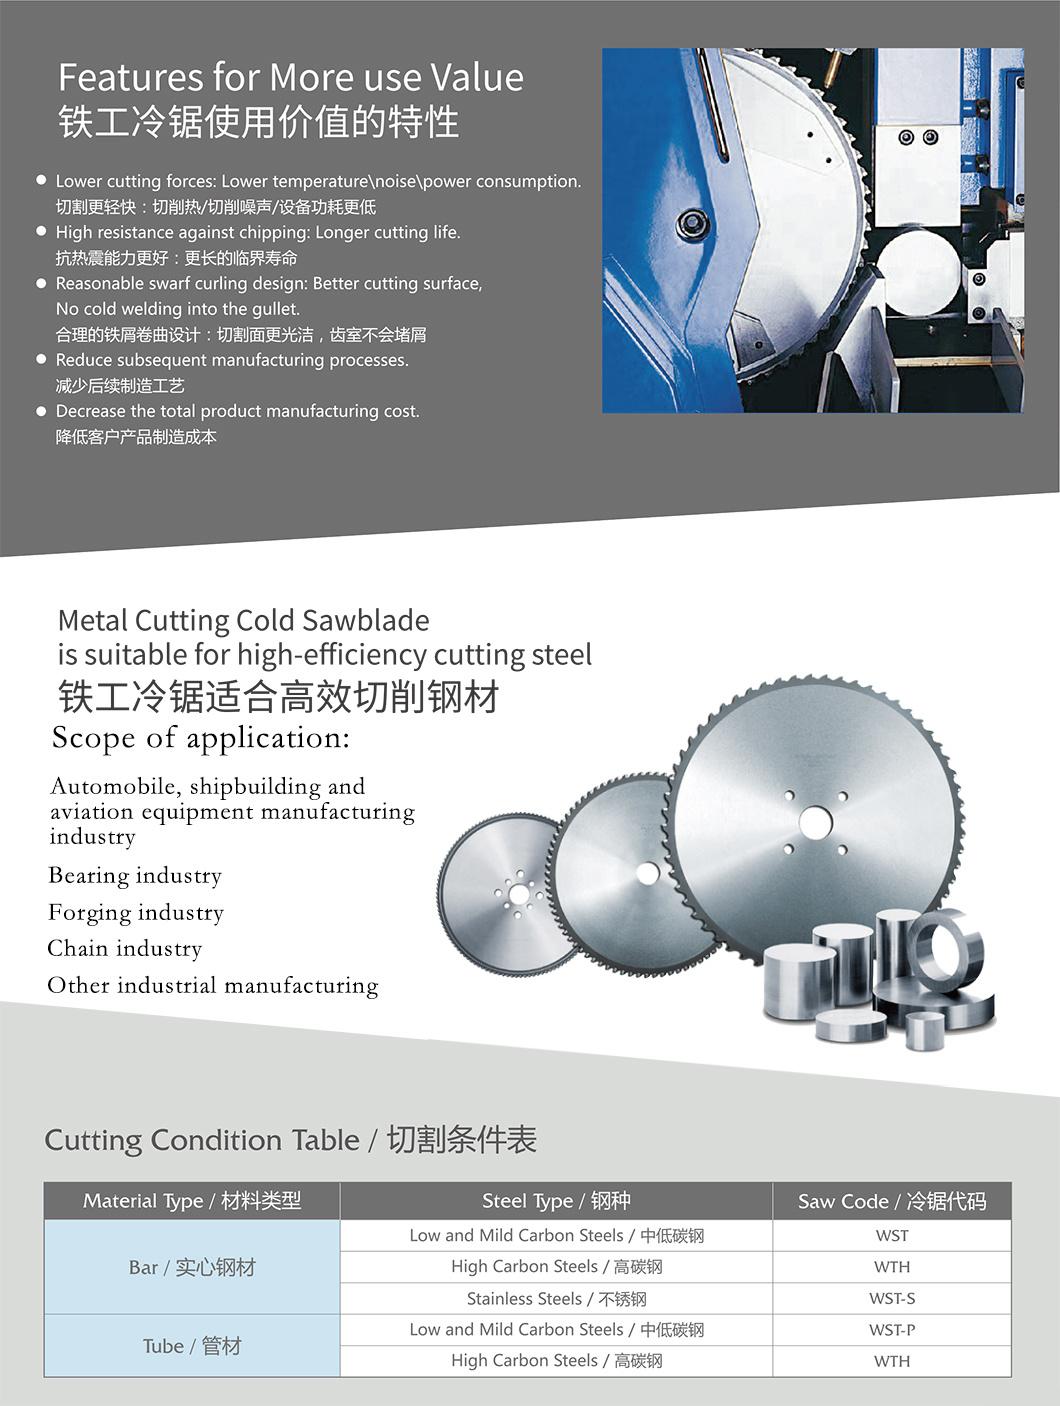 Universal Application and High Performance Cold Saw for Metal Cutting